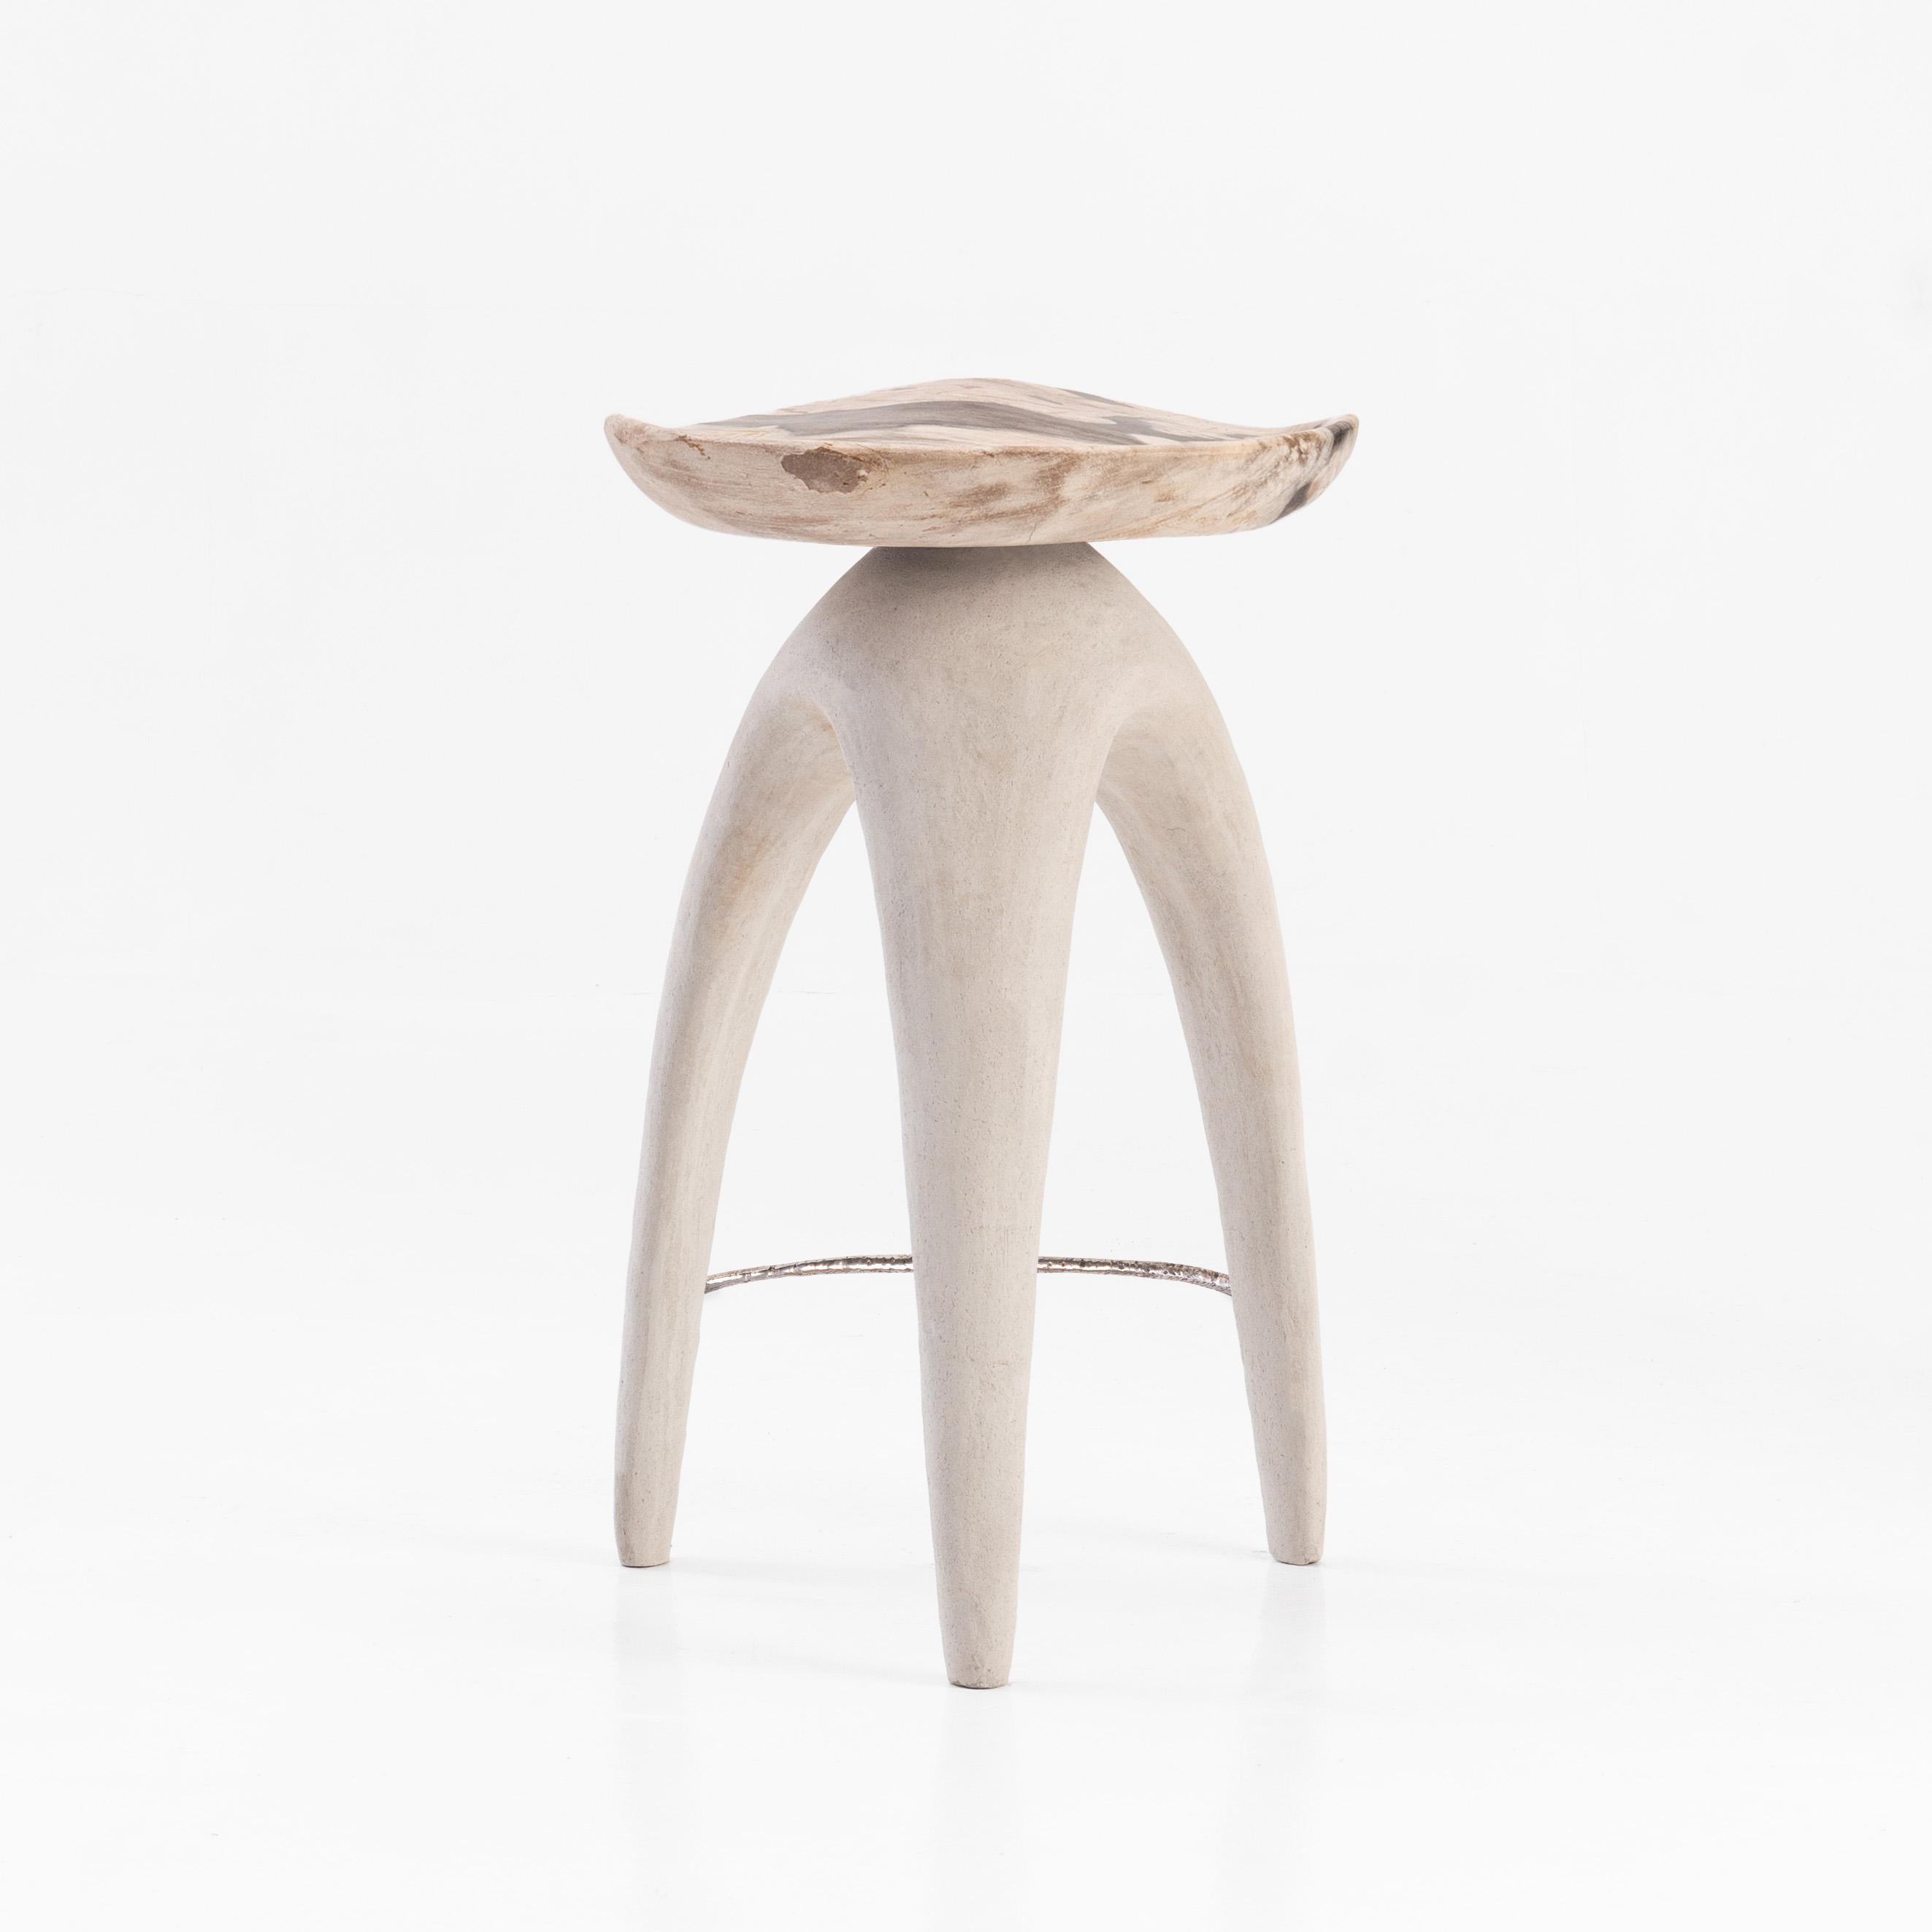 Organique Bermuda Love Triangle • Hand-Carved Solid Petrified Wood Stool by Odditi en vente